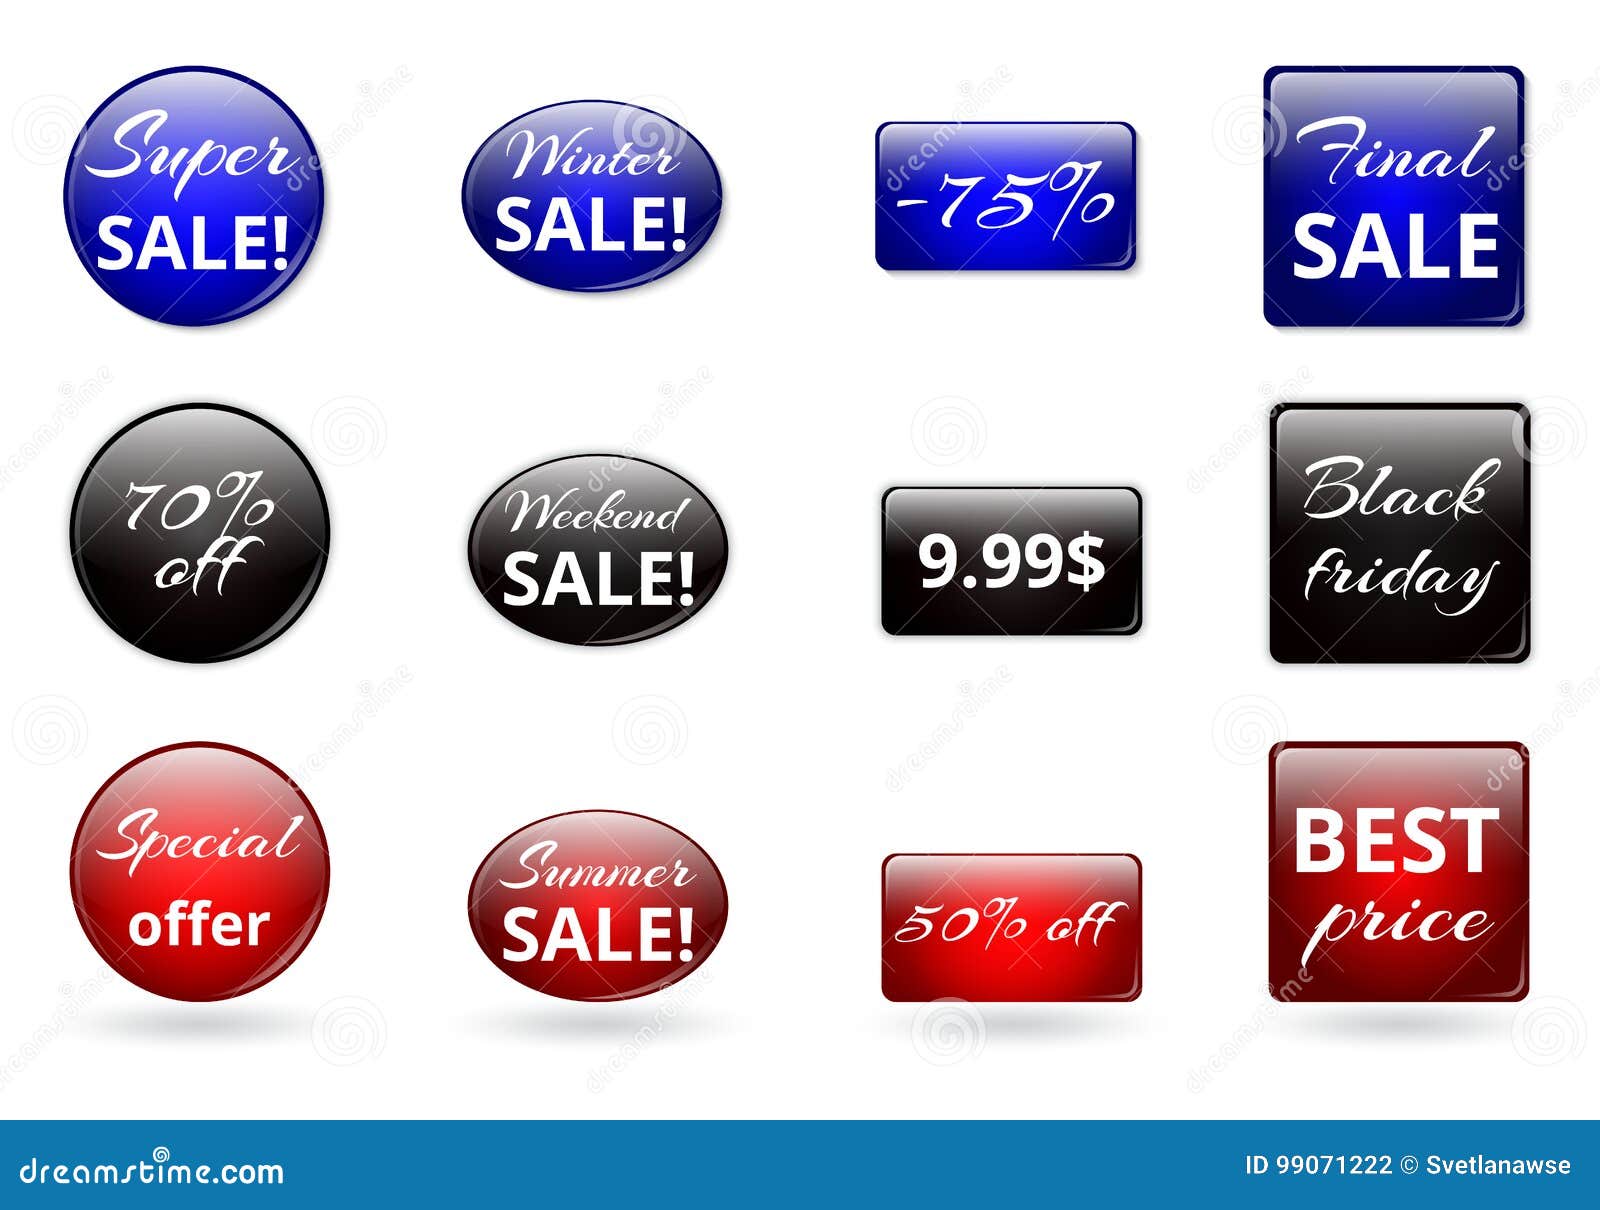 Icon set special offers stock vector. Illustration of illuminated